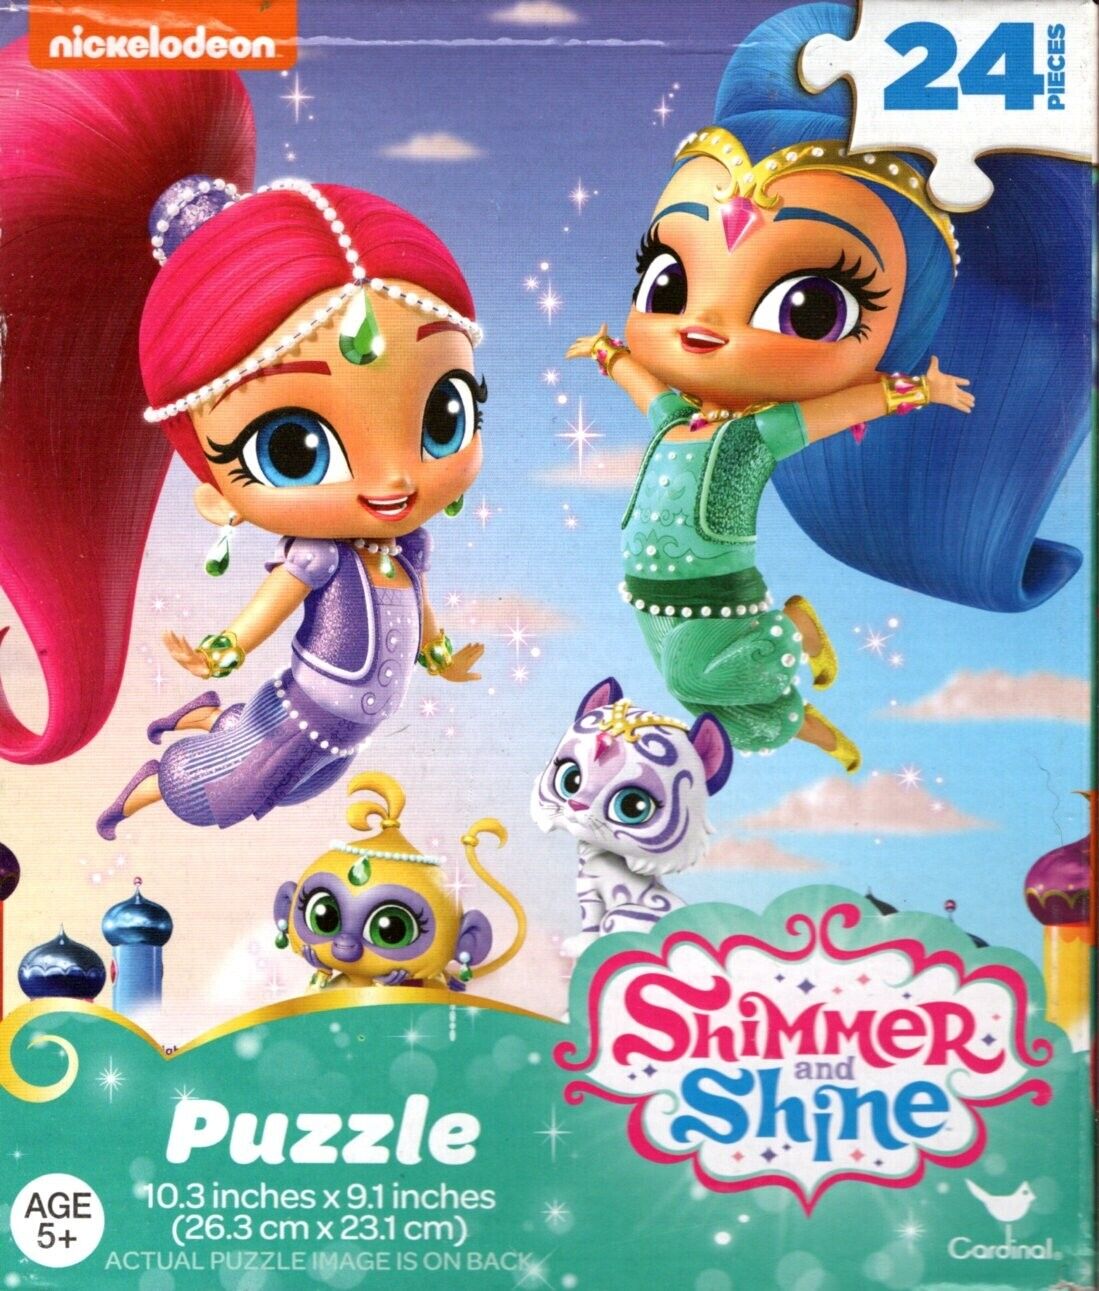 Nickelodeon Shimmer and Shine - 24 Pieces Jigsaw Puzzle v3